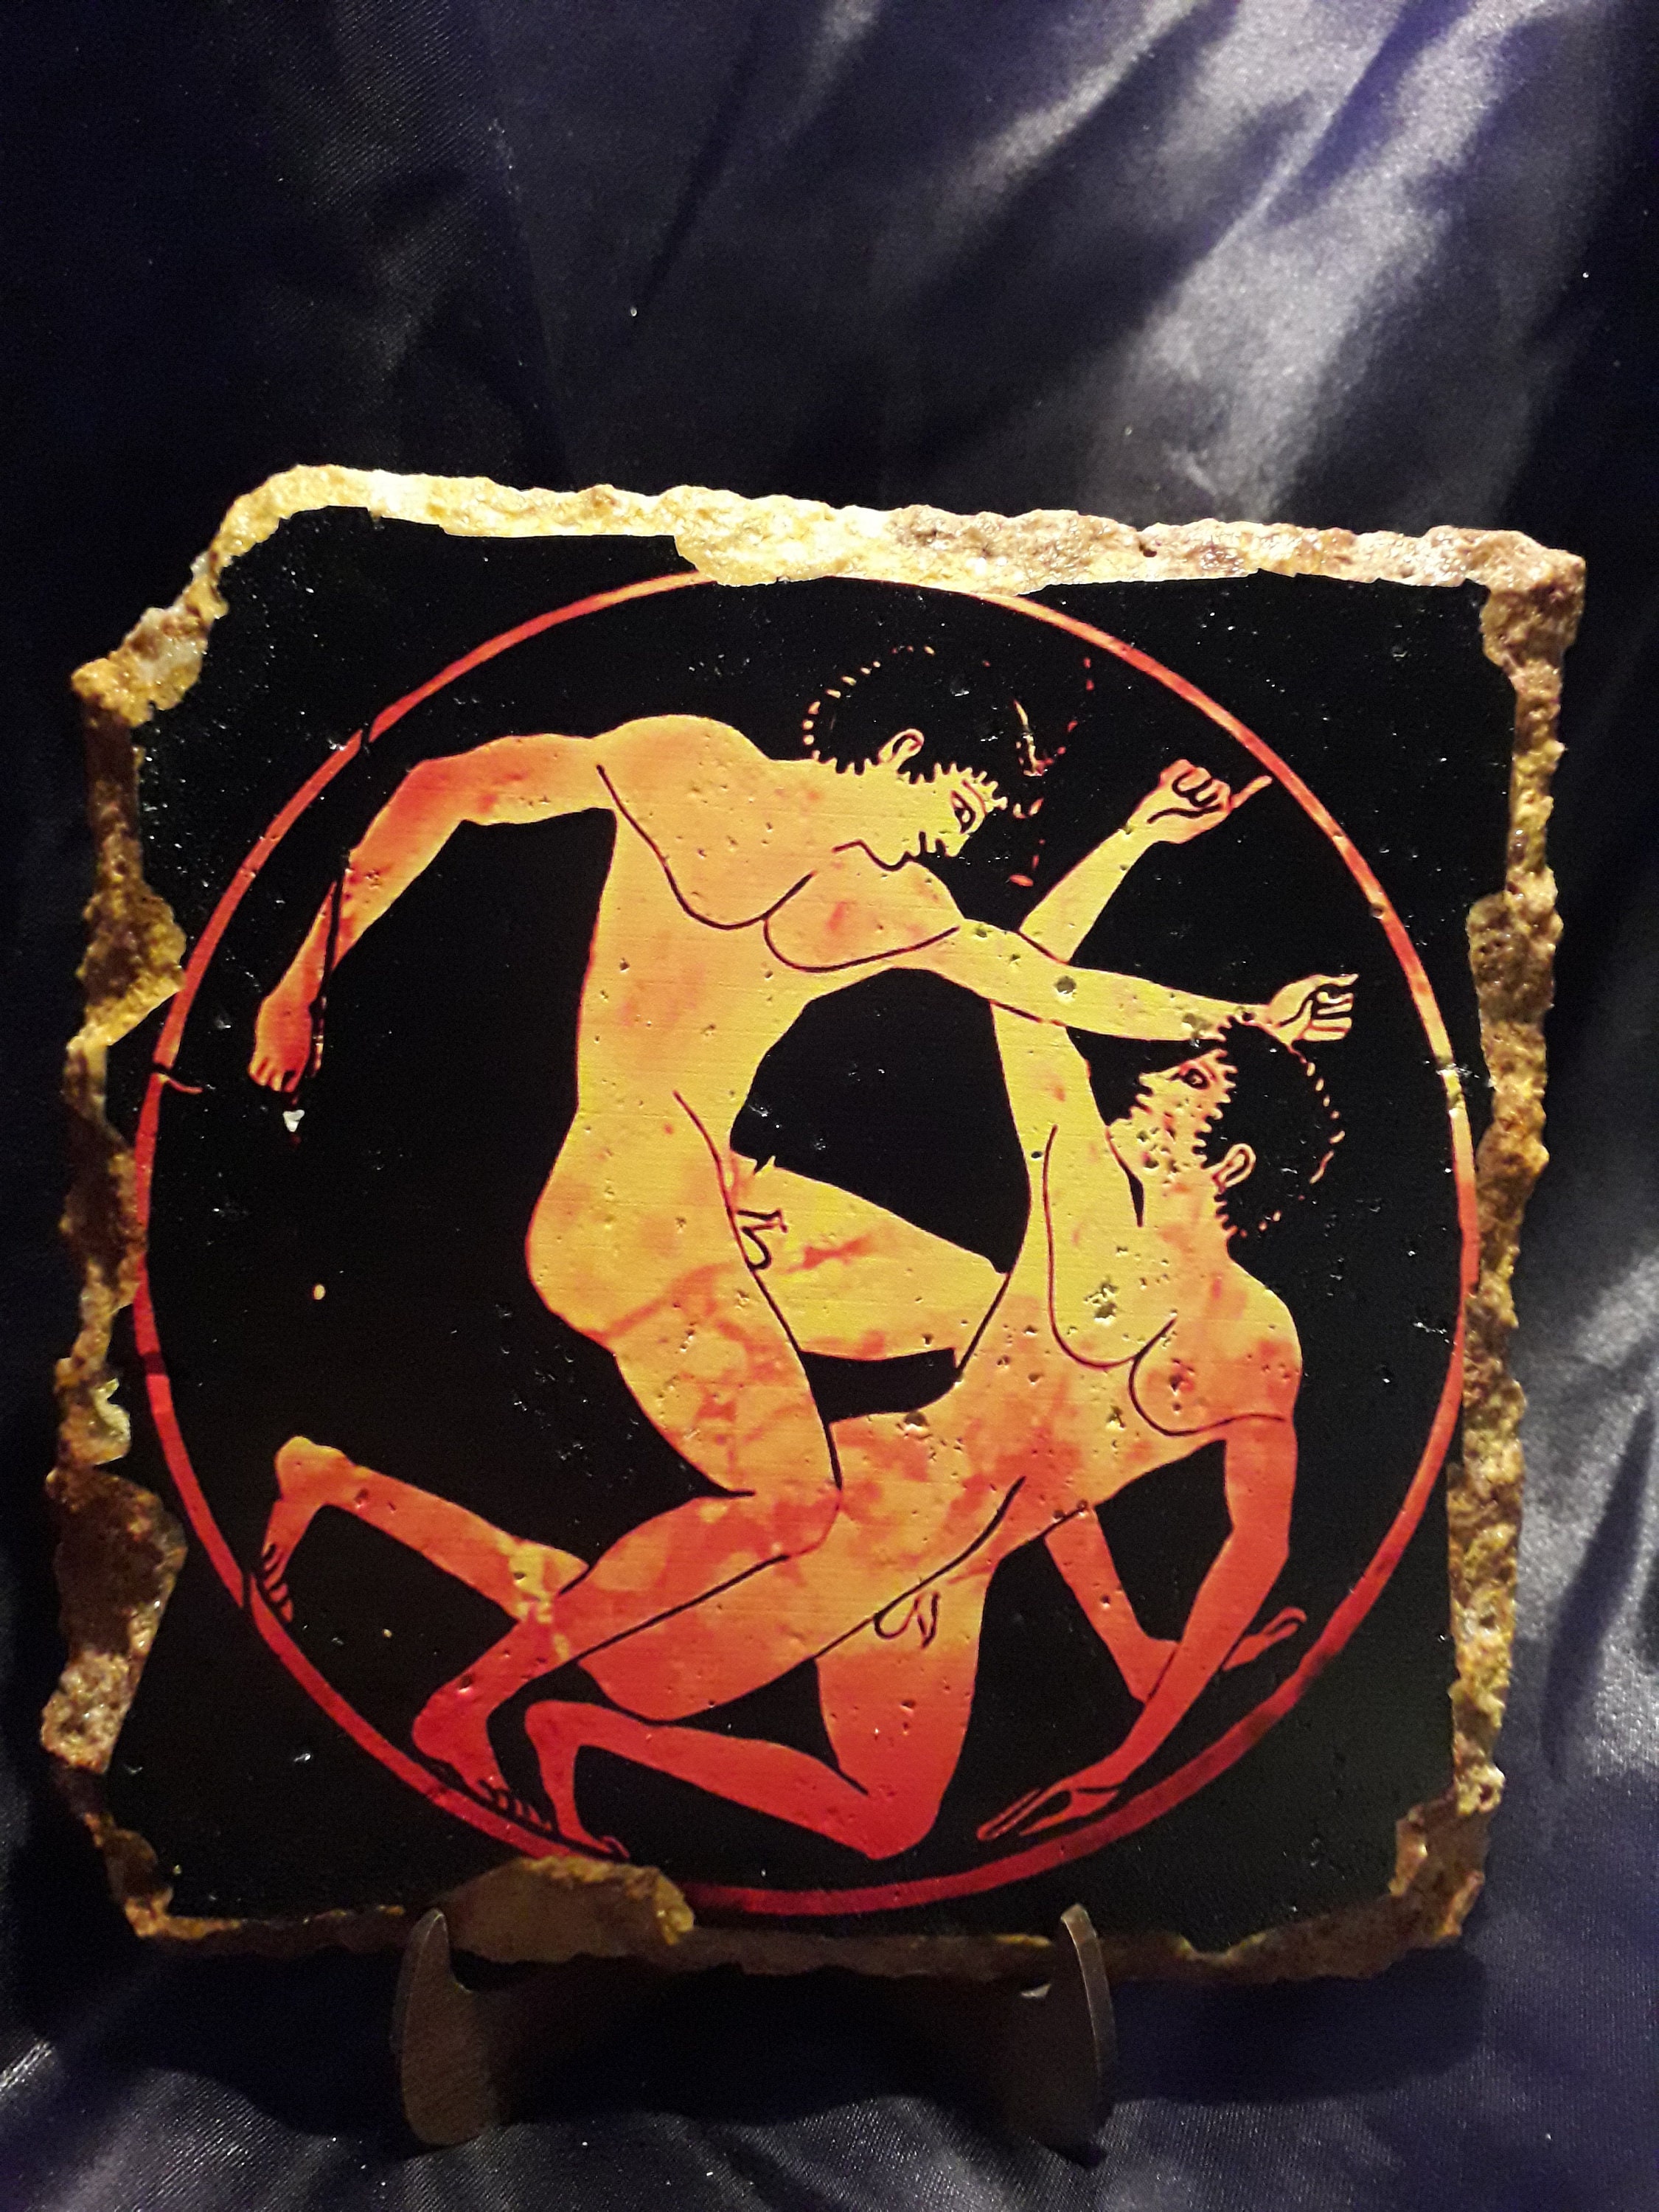 Ancient Olympics Gay Porn - Ancient Olympic Games Wrestling Roman Wedding Gift - Etsy